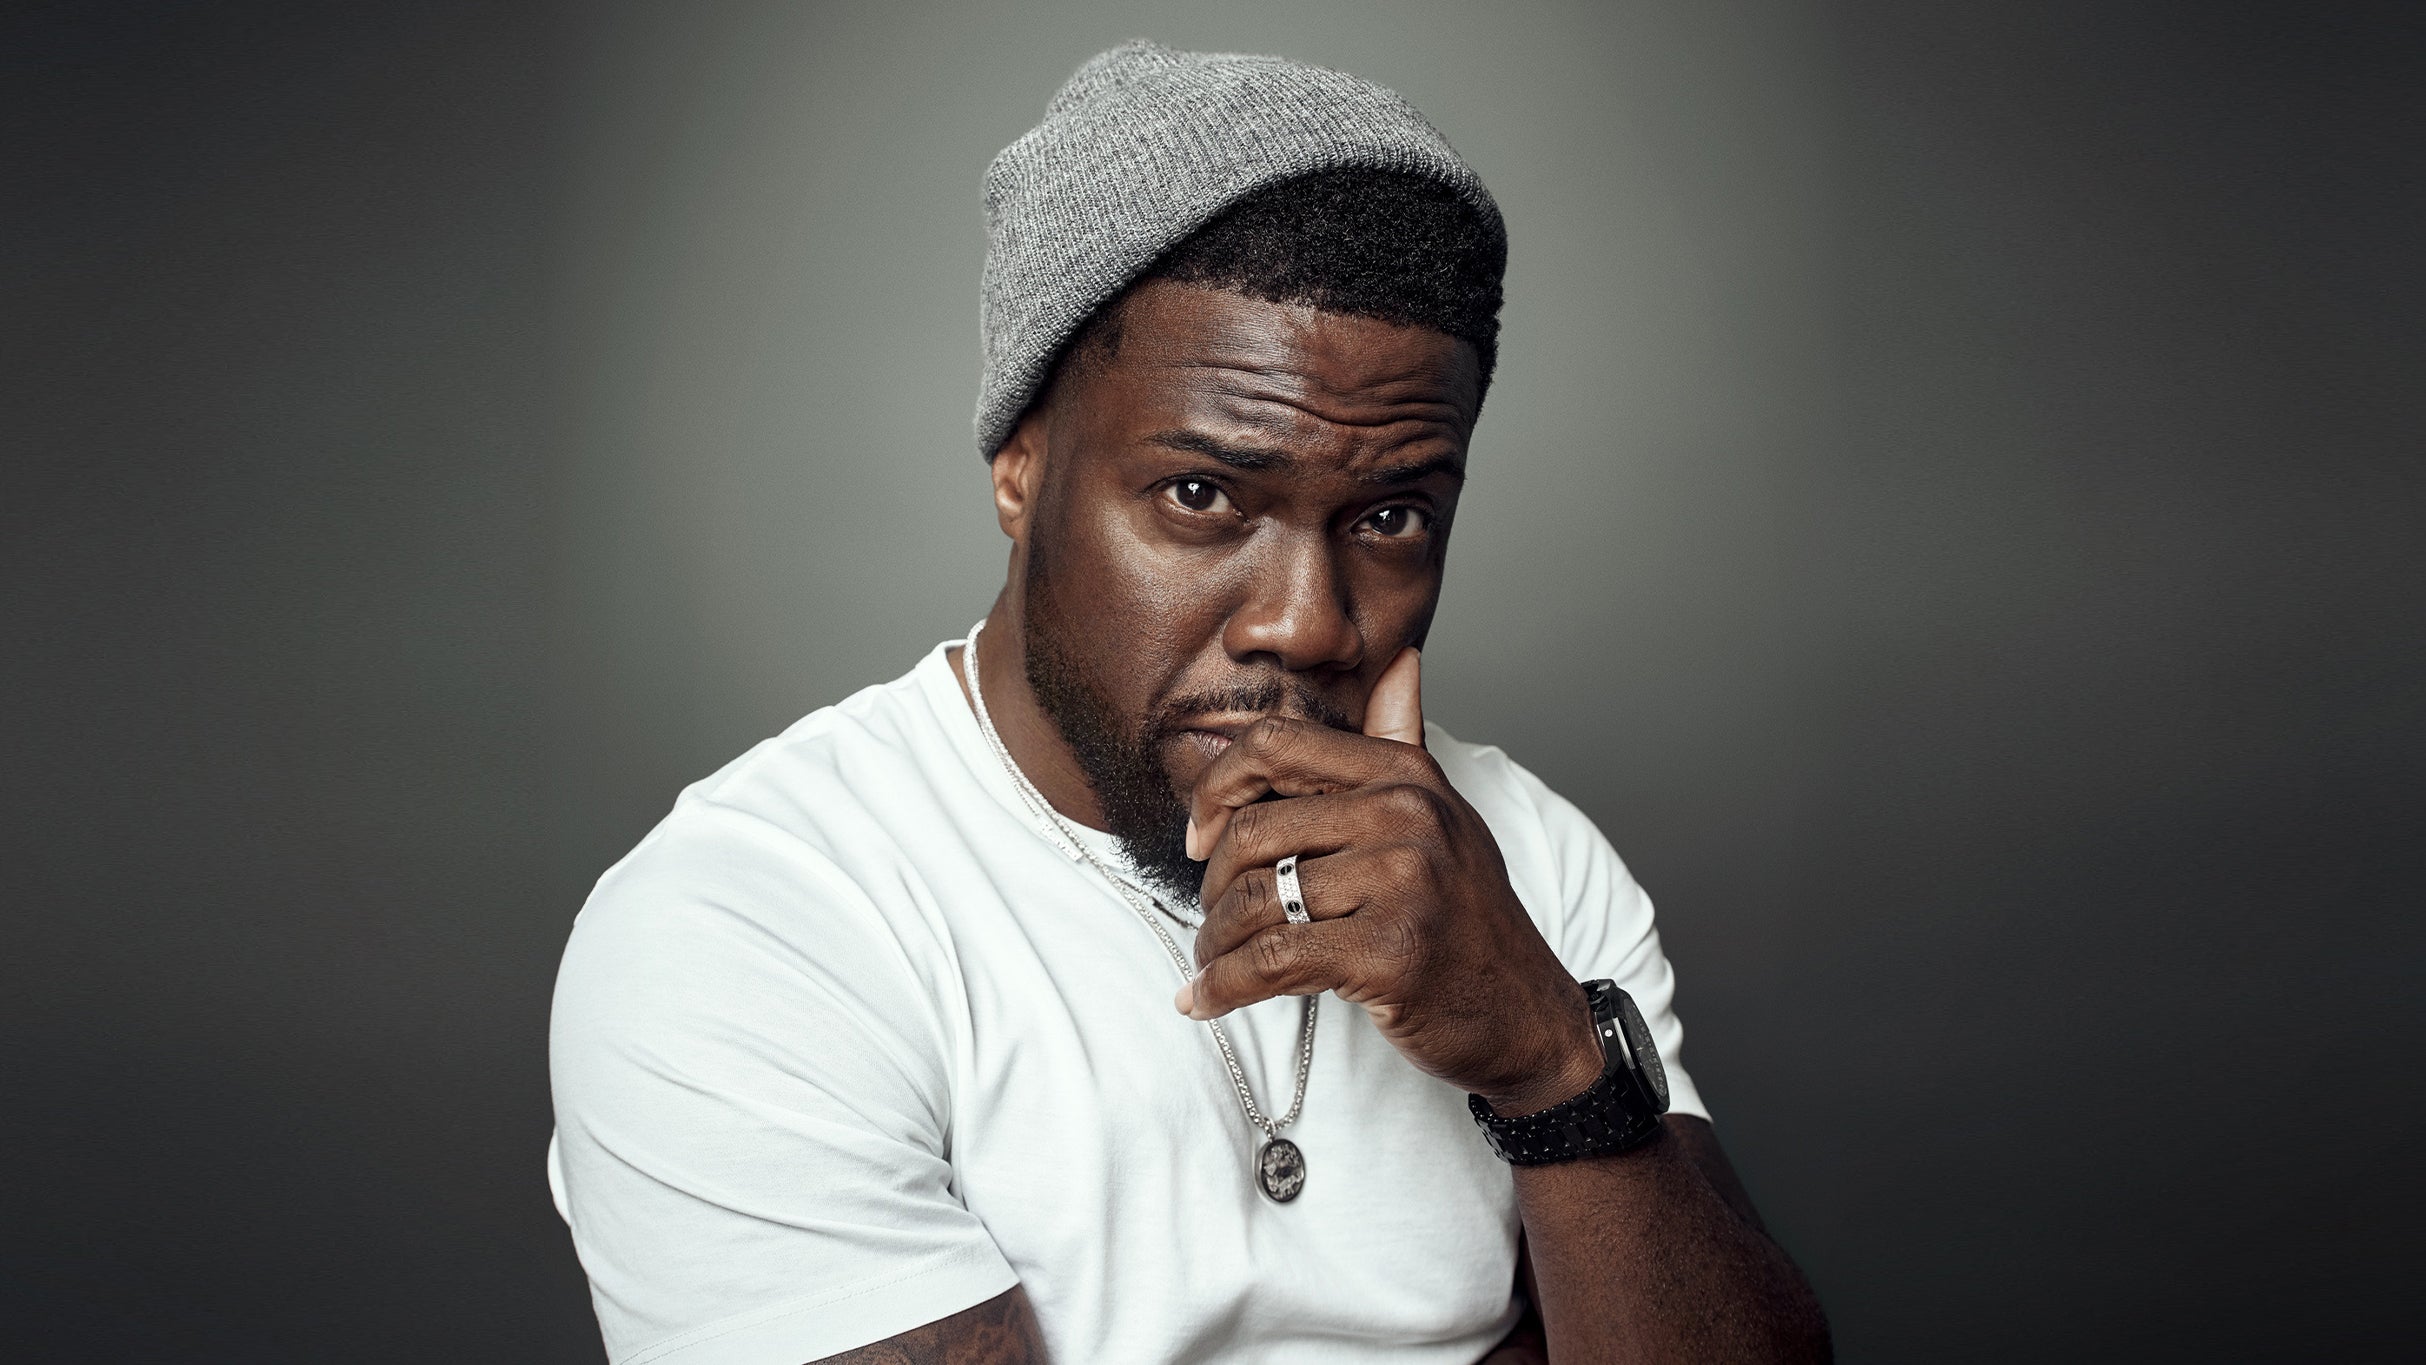 Kevin Hart Net Worth and Source of Income